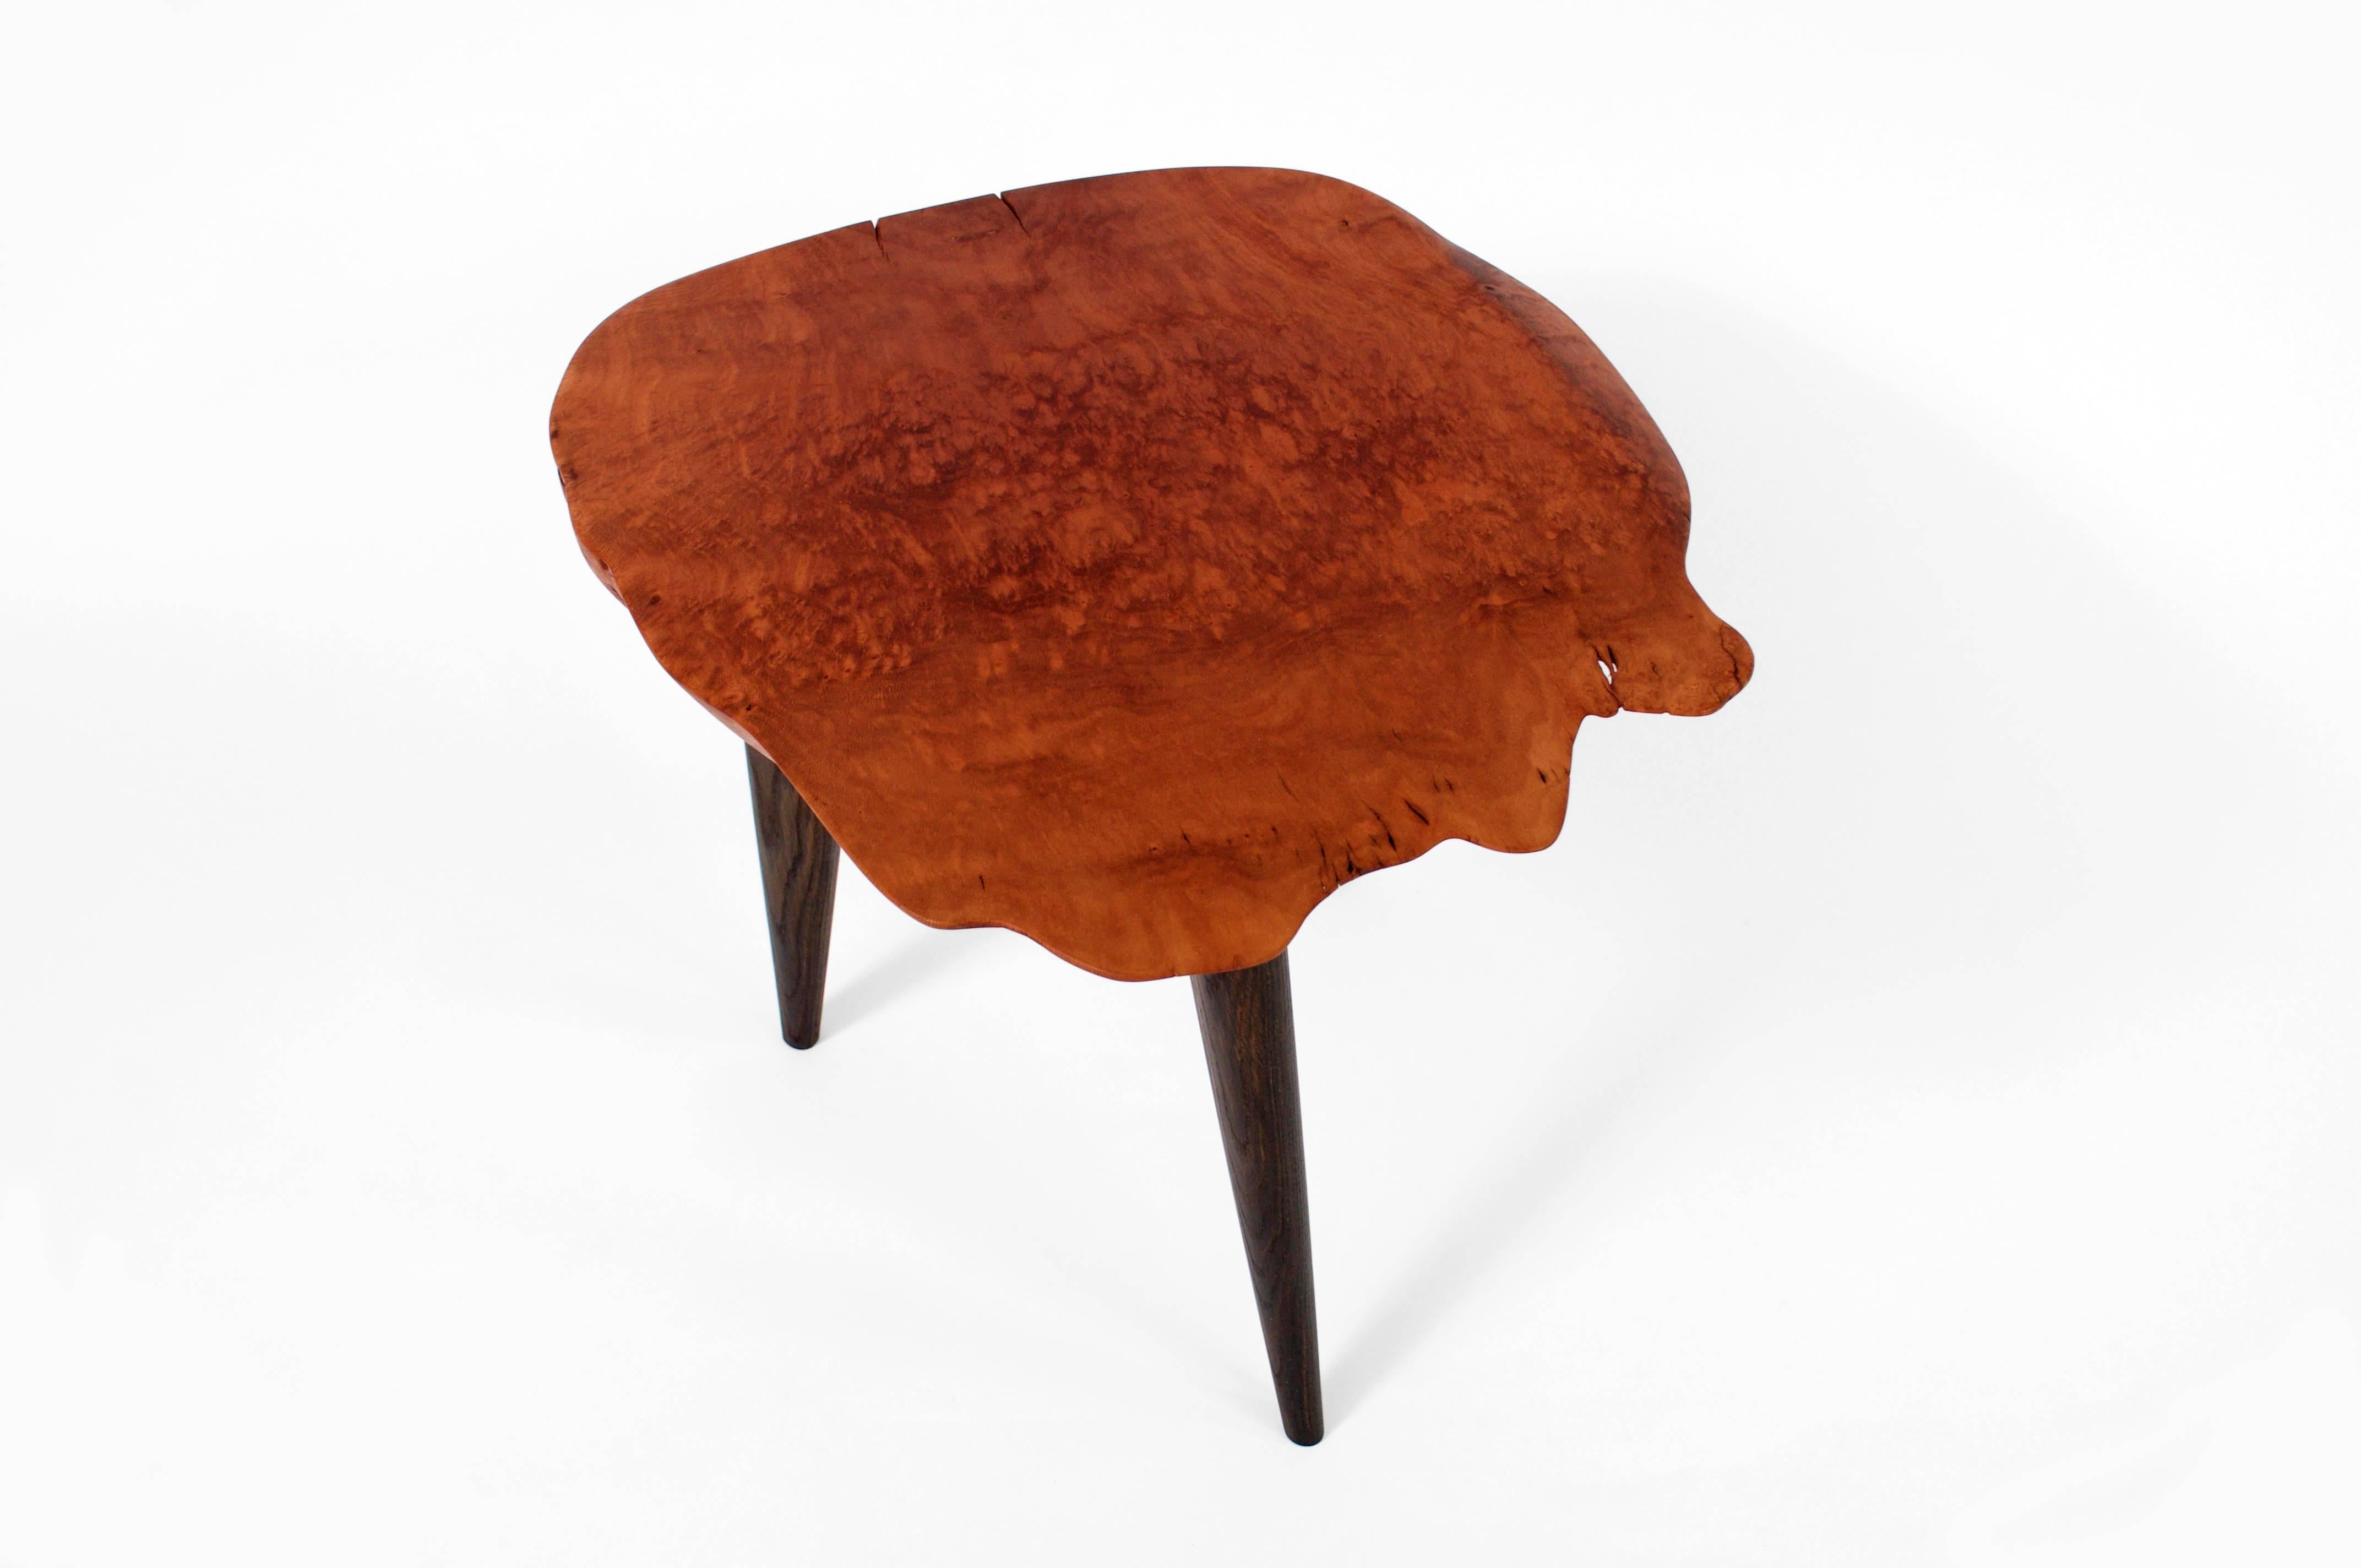 Organic Modern Unique Signed Sycamore Table by Jörg Pietschmann